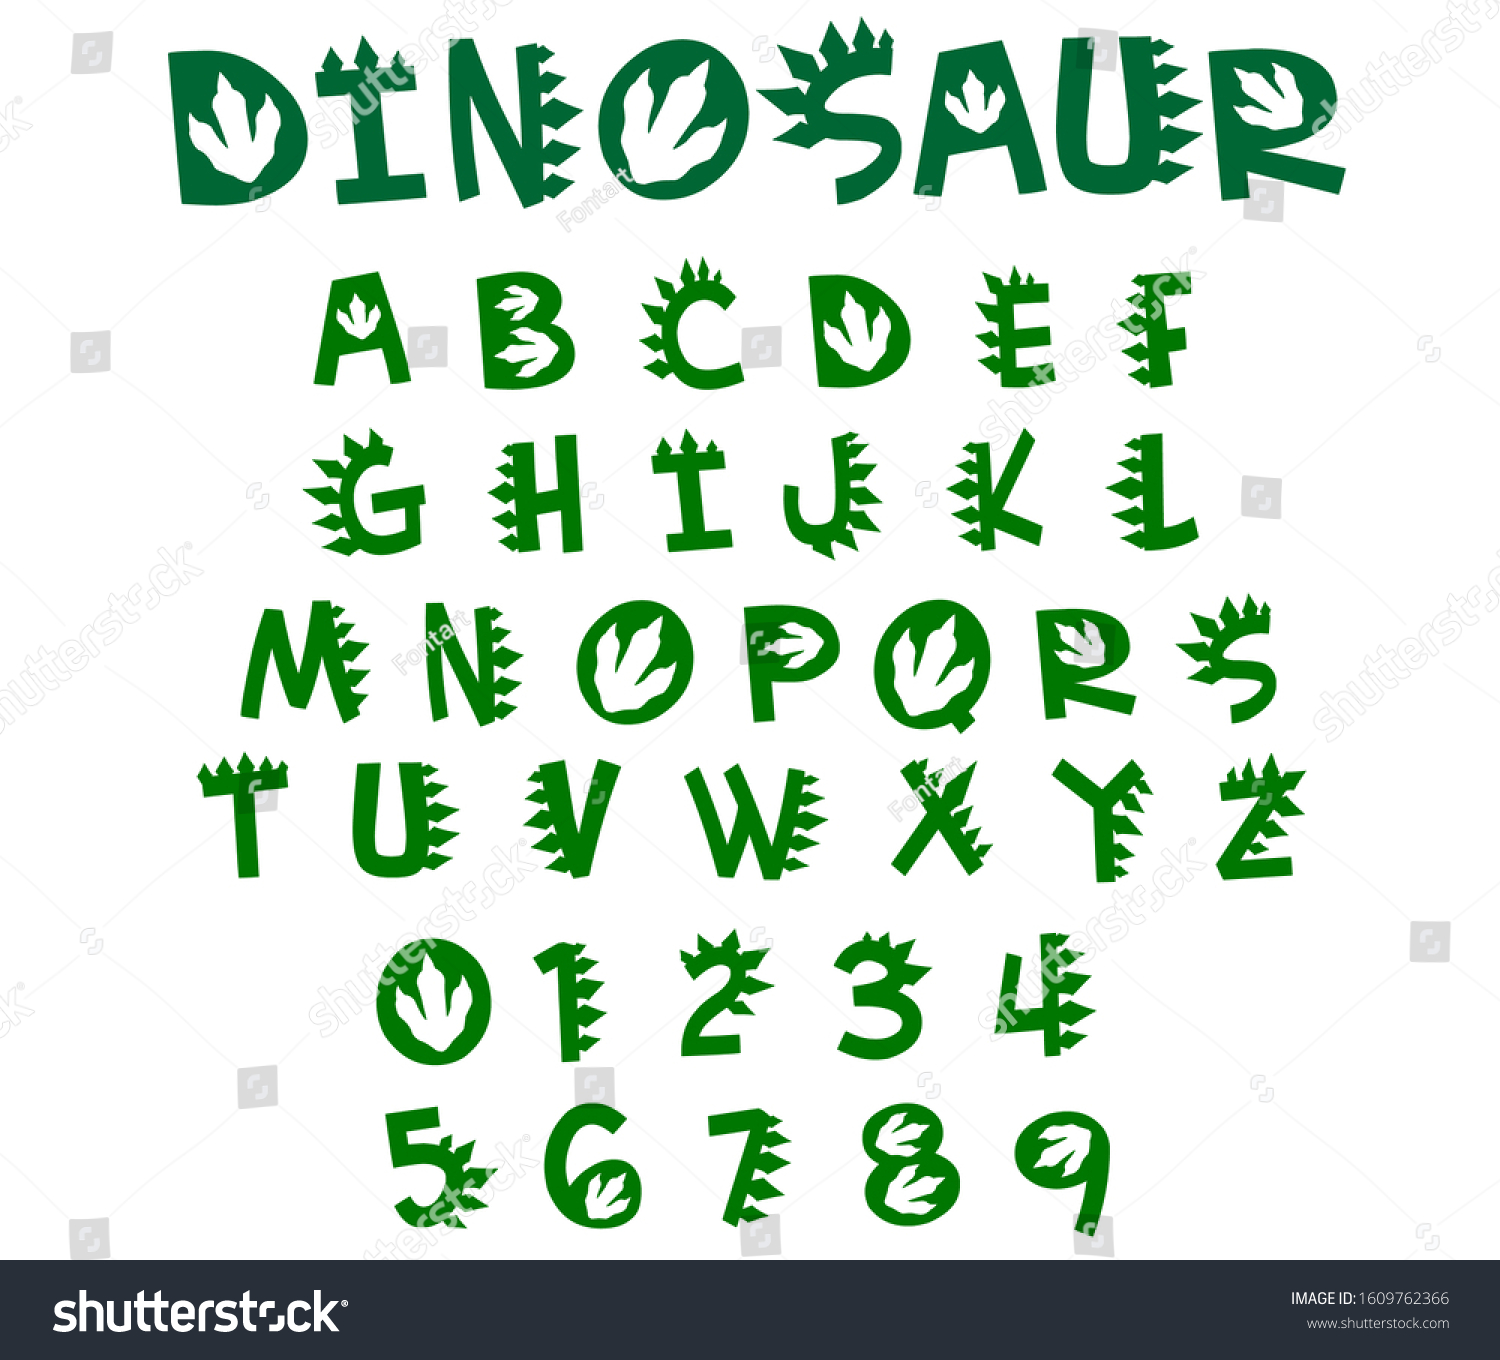 SVG of Dinosaur font vector. Green letters and numbers of prehistoric reptile. svg